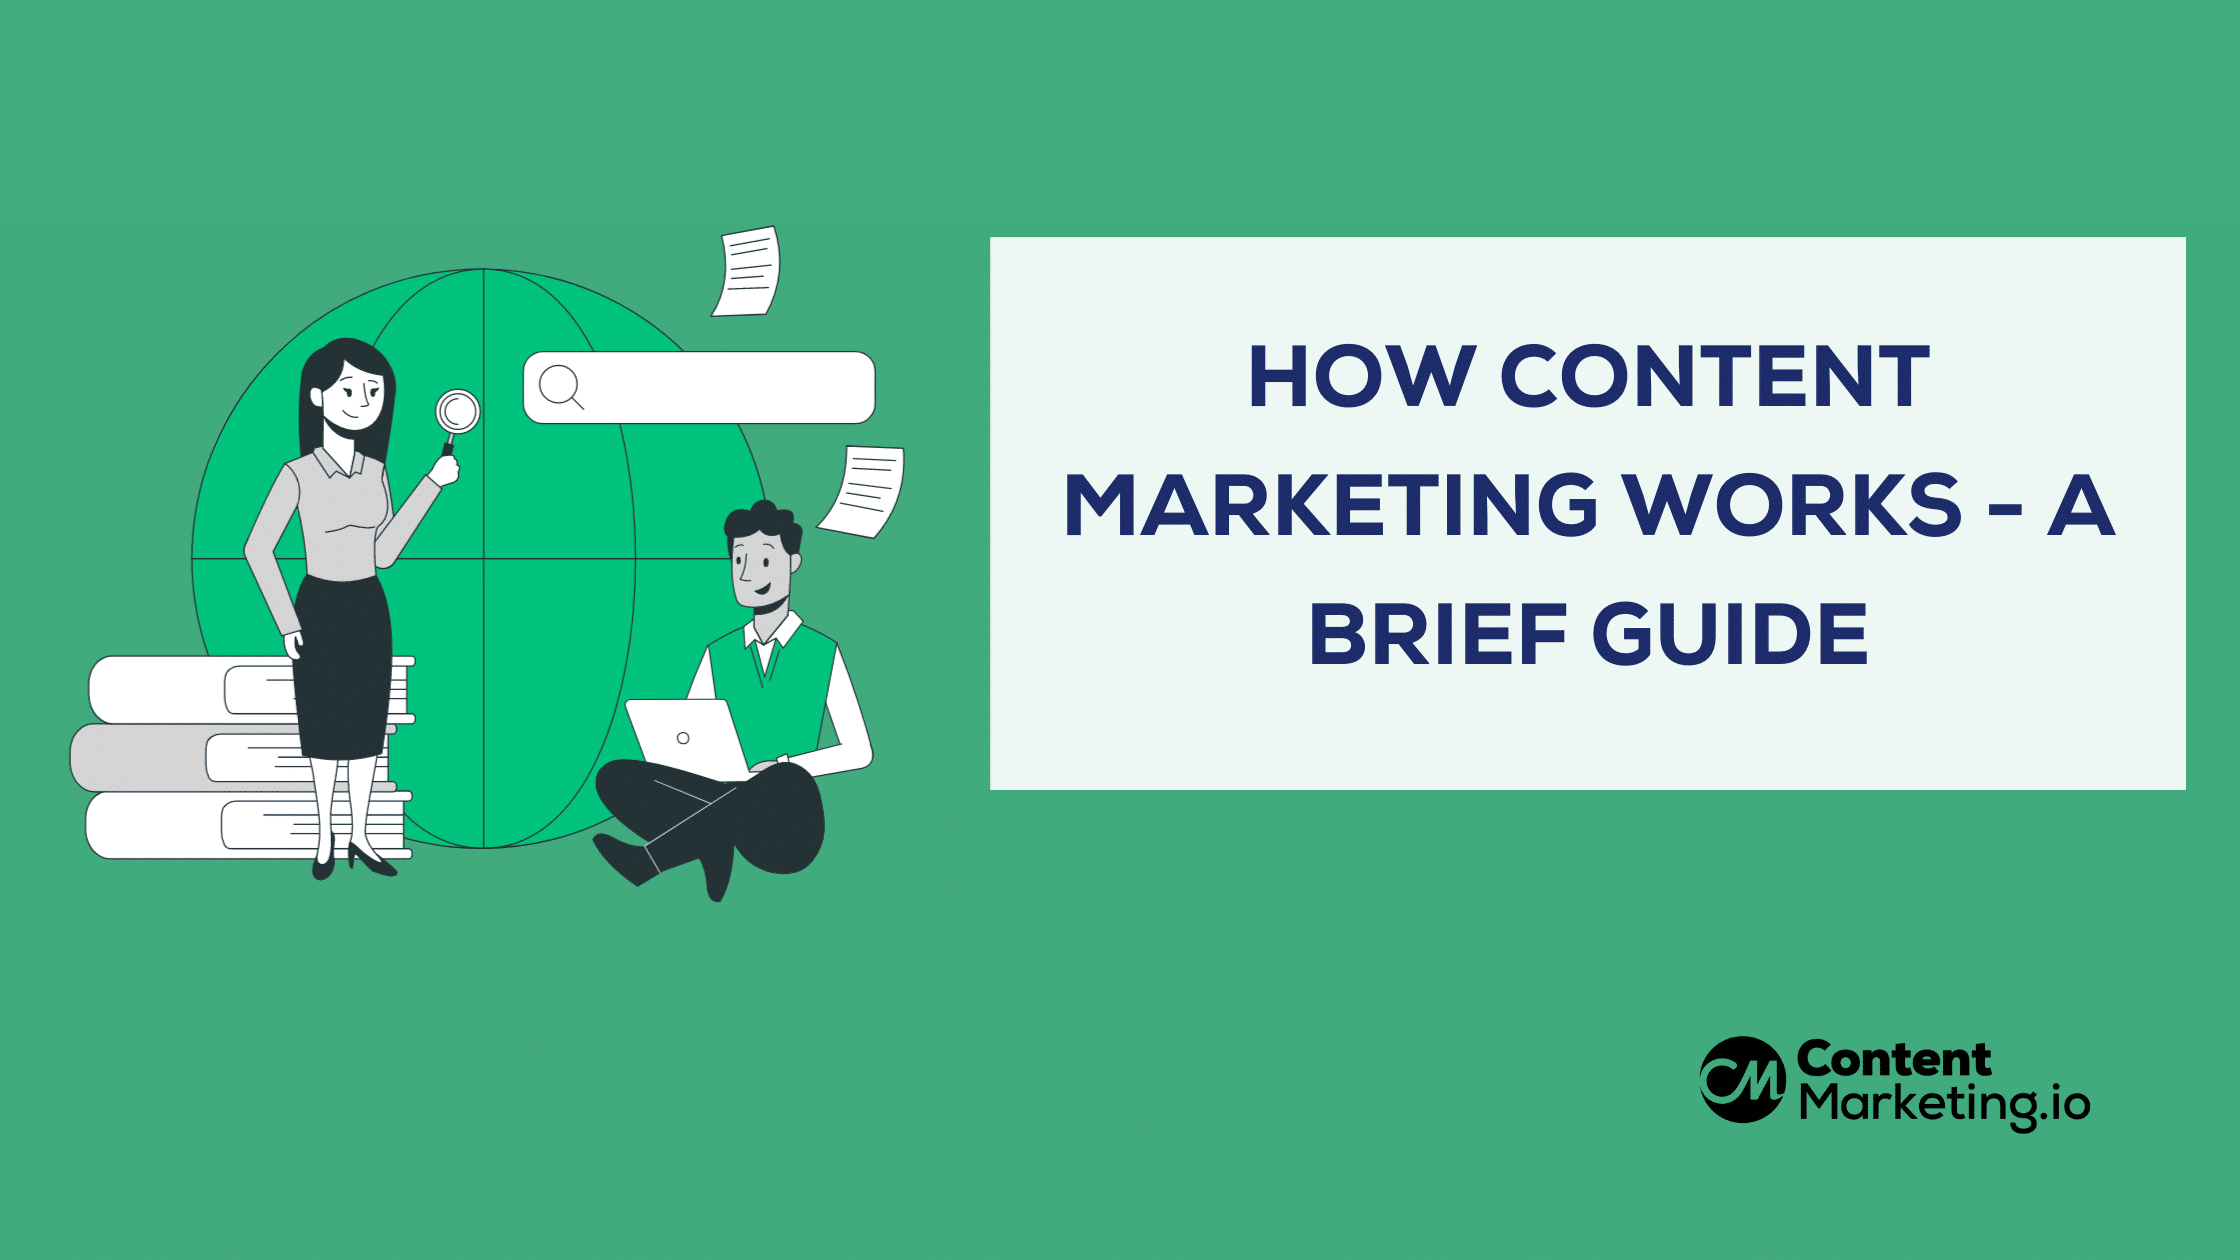 How Content Marketing Works - A Brief Guide